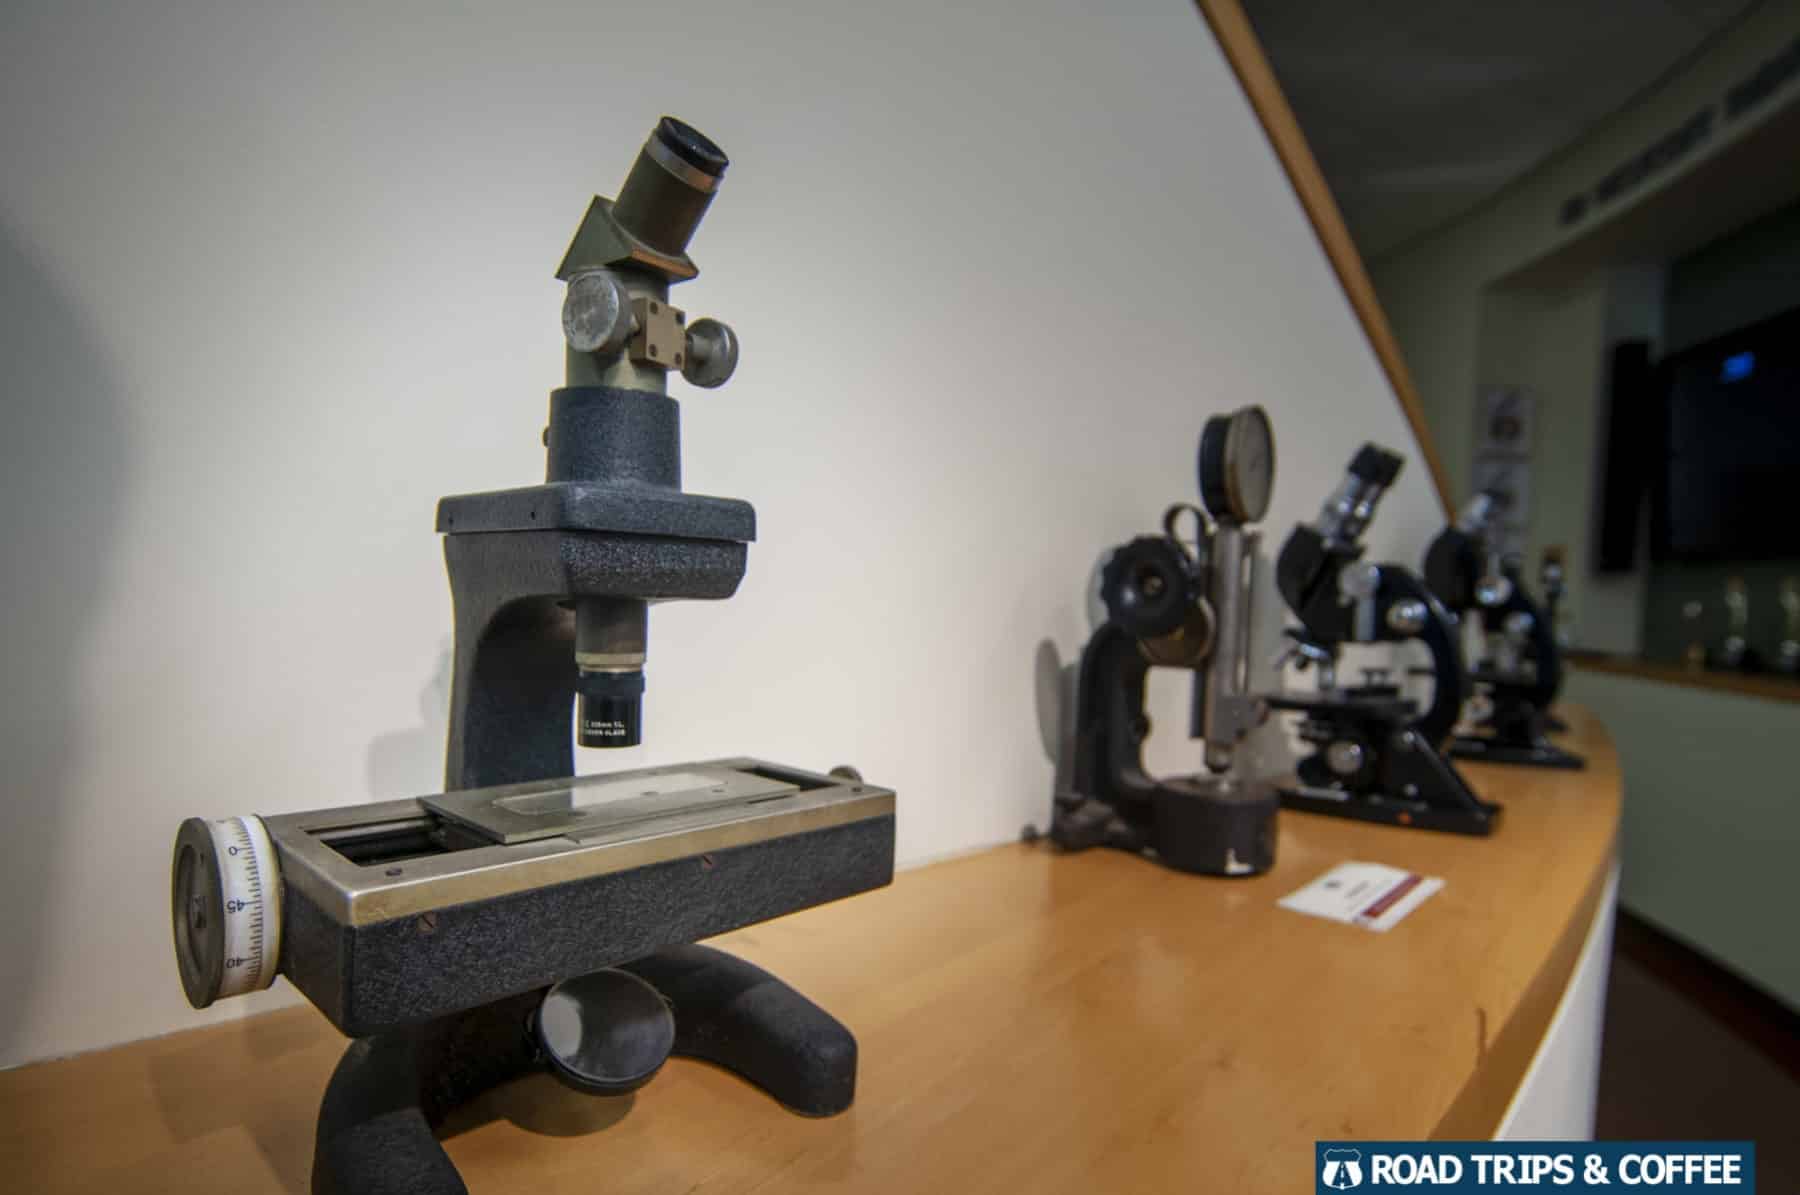 A row of microscopes on display at the Y-12 New Hope Center in Oak Ridge, Tennessee